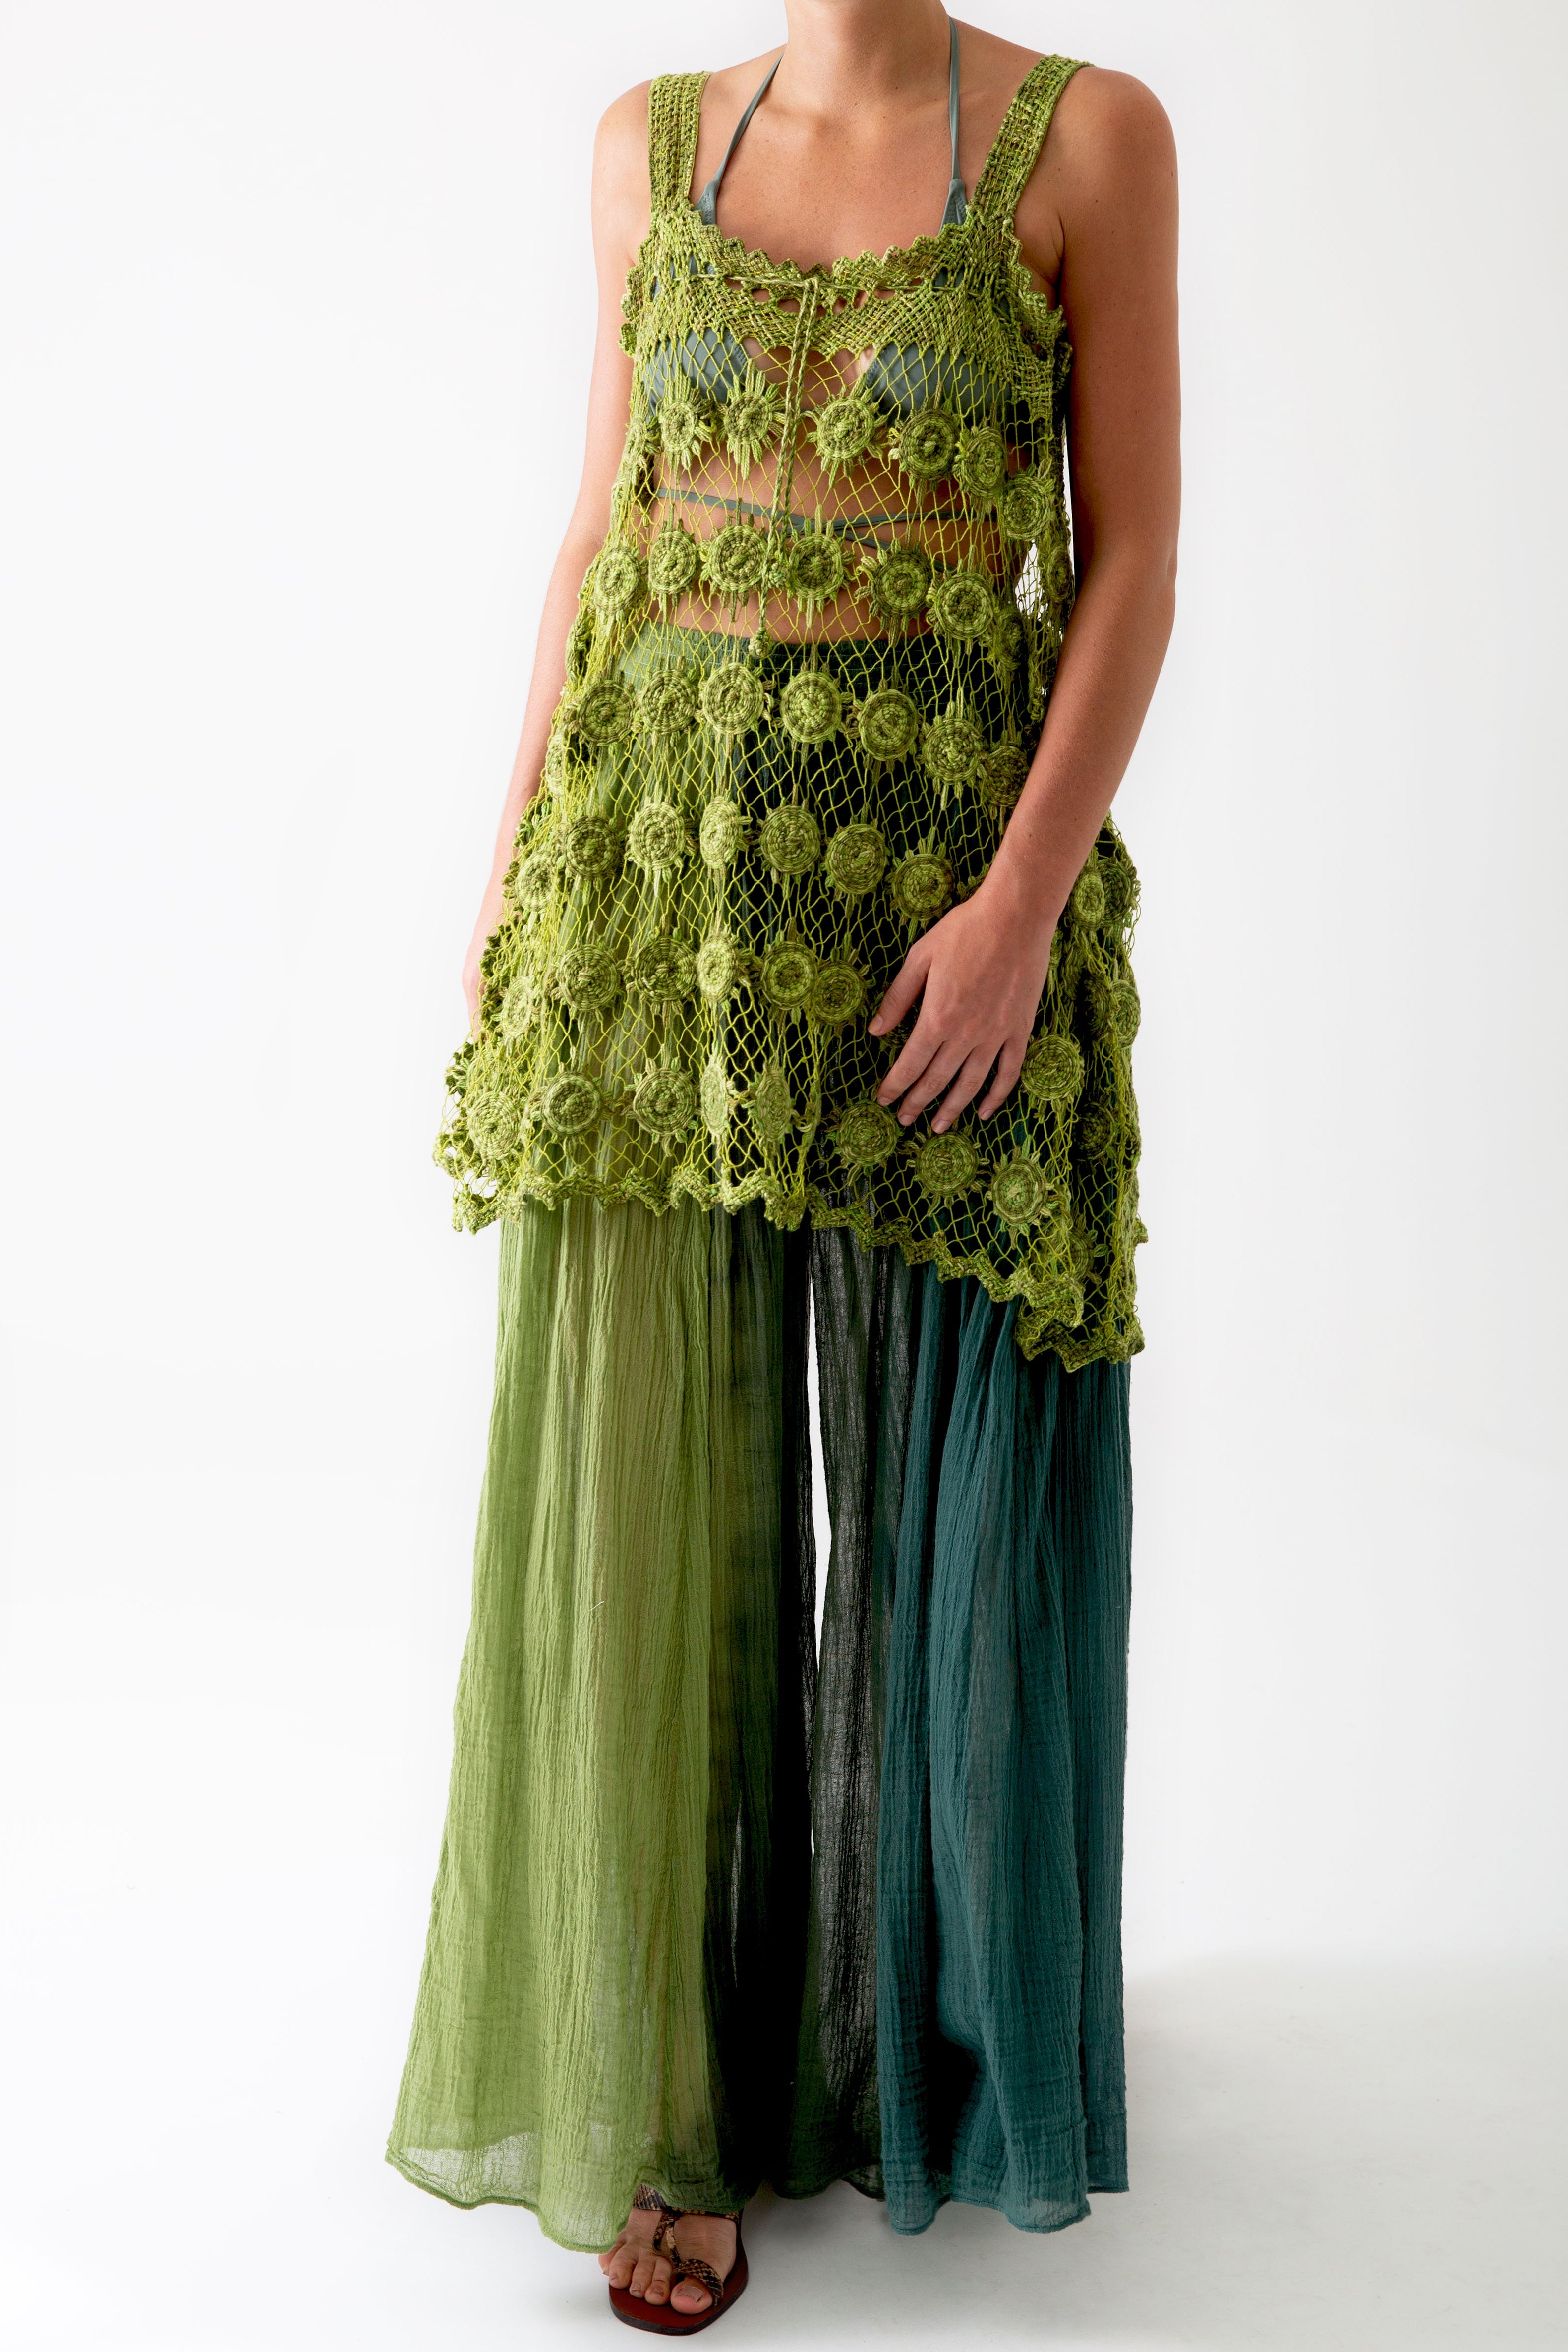 Vana Filet Lace Coverup in Green by Miguelina